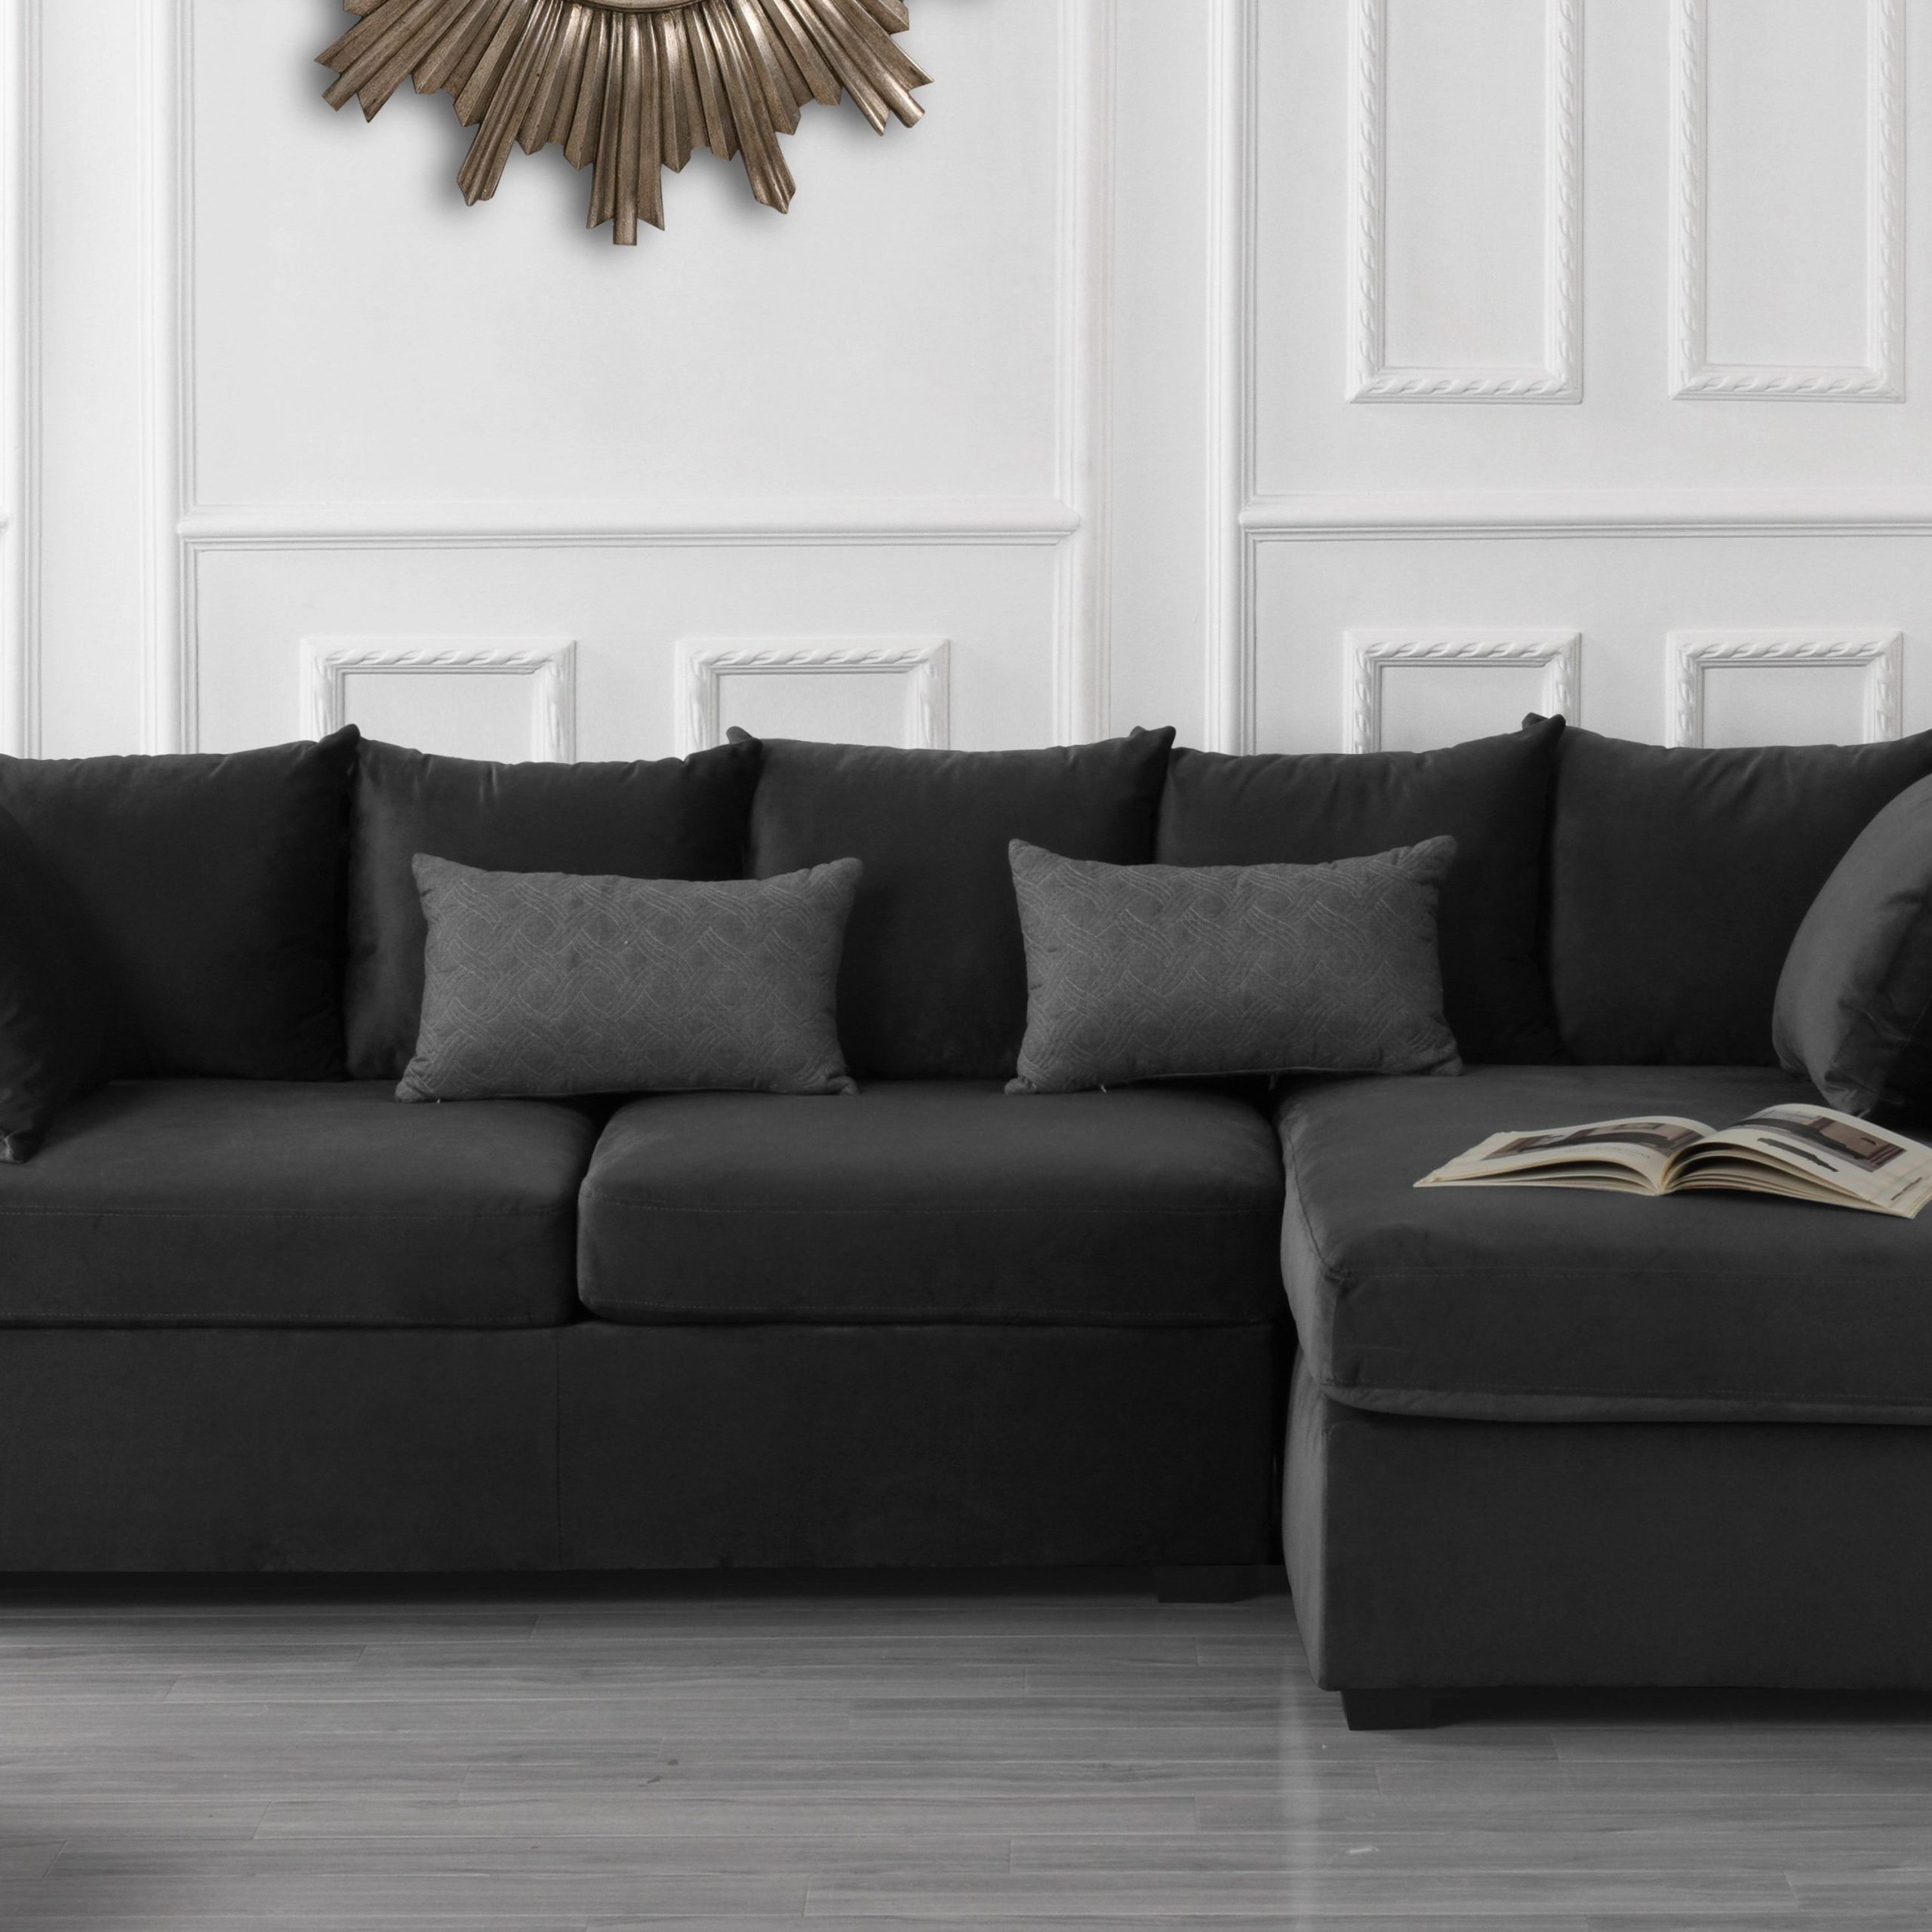 3 Seat L Shaped Sofas In Black Throughout Trendy 30+ Large L Shape Couch (View 15 of 15)